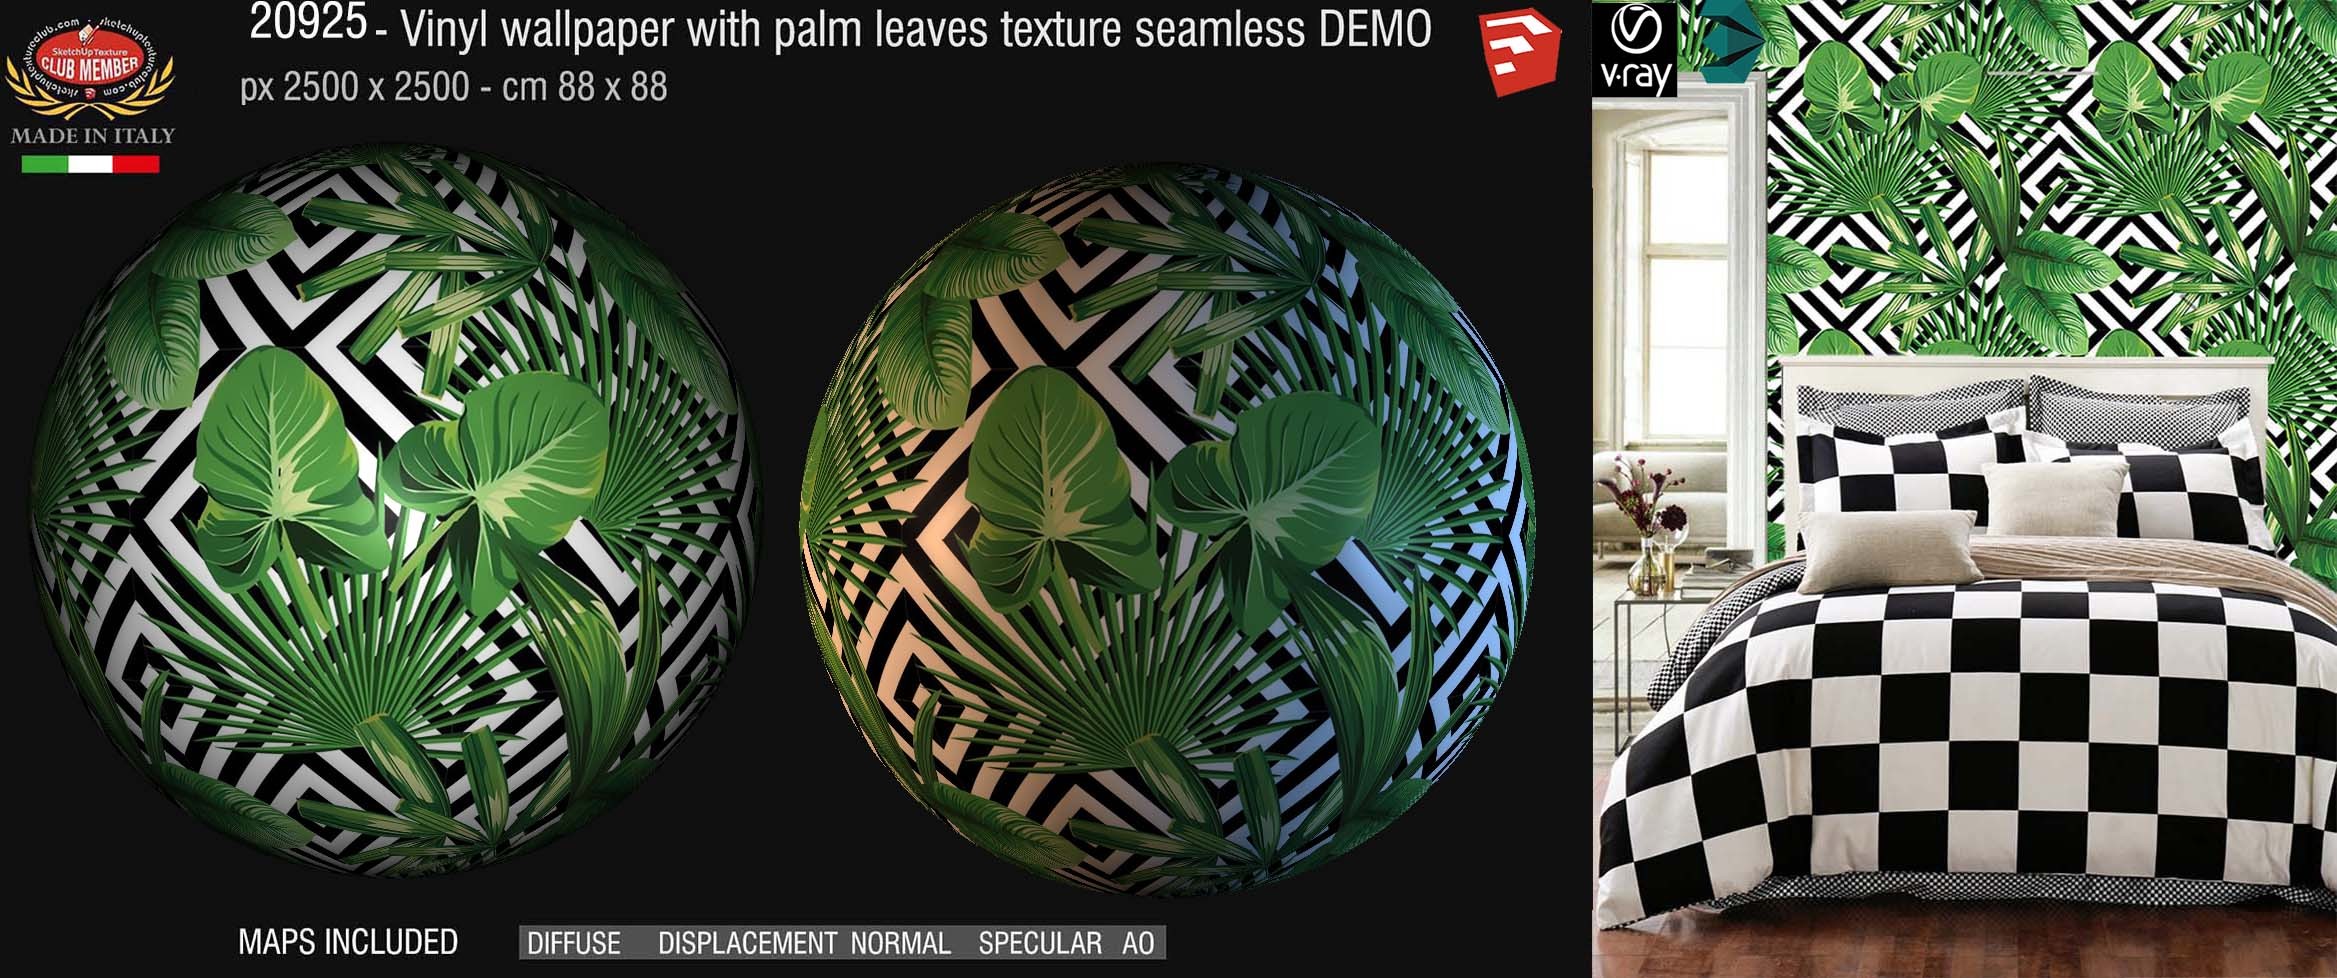 20925 Vinyl wallpaper with palm leaves PBR texture seamlessDEMO